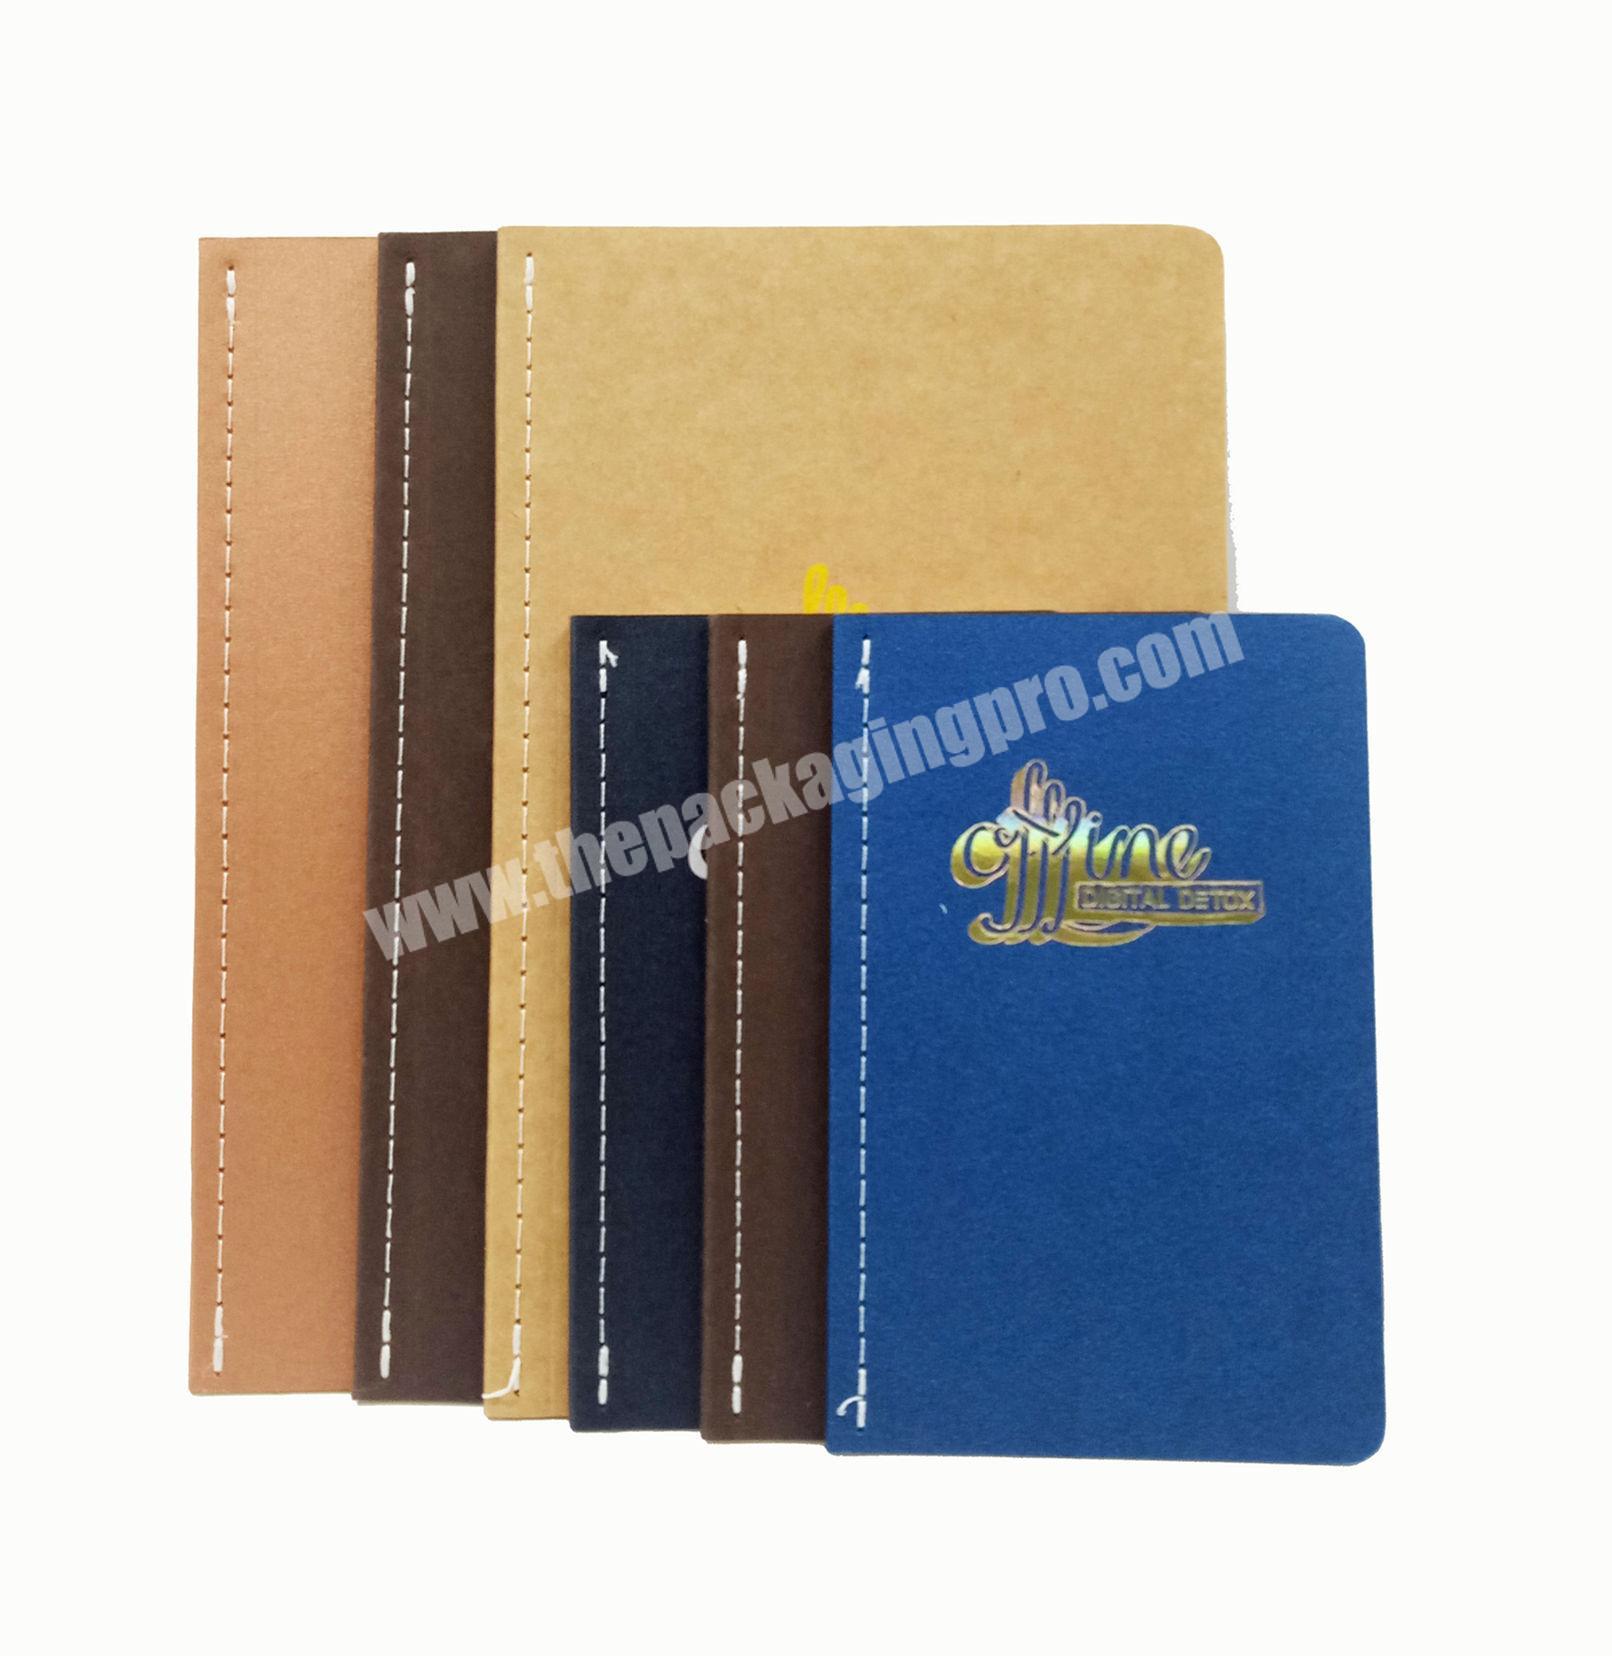 Top quality soft cover notebook custom week planner school student diary writing journal